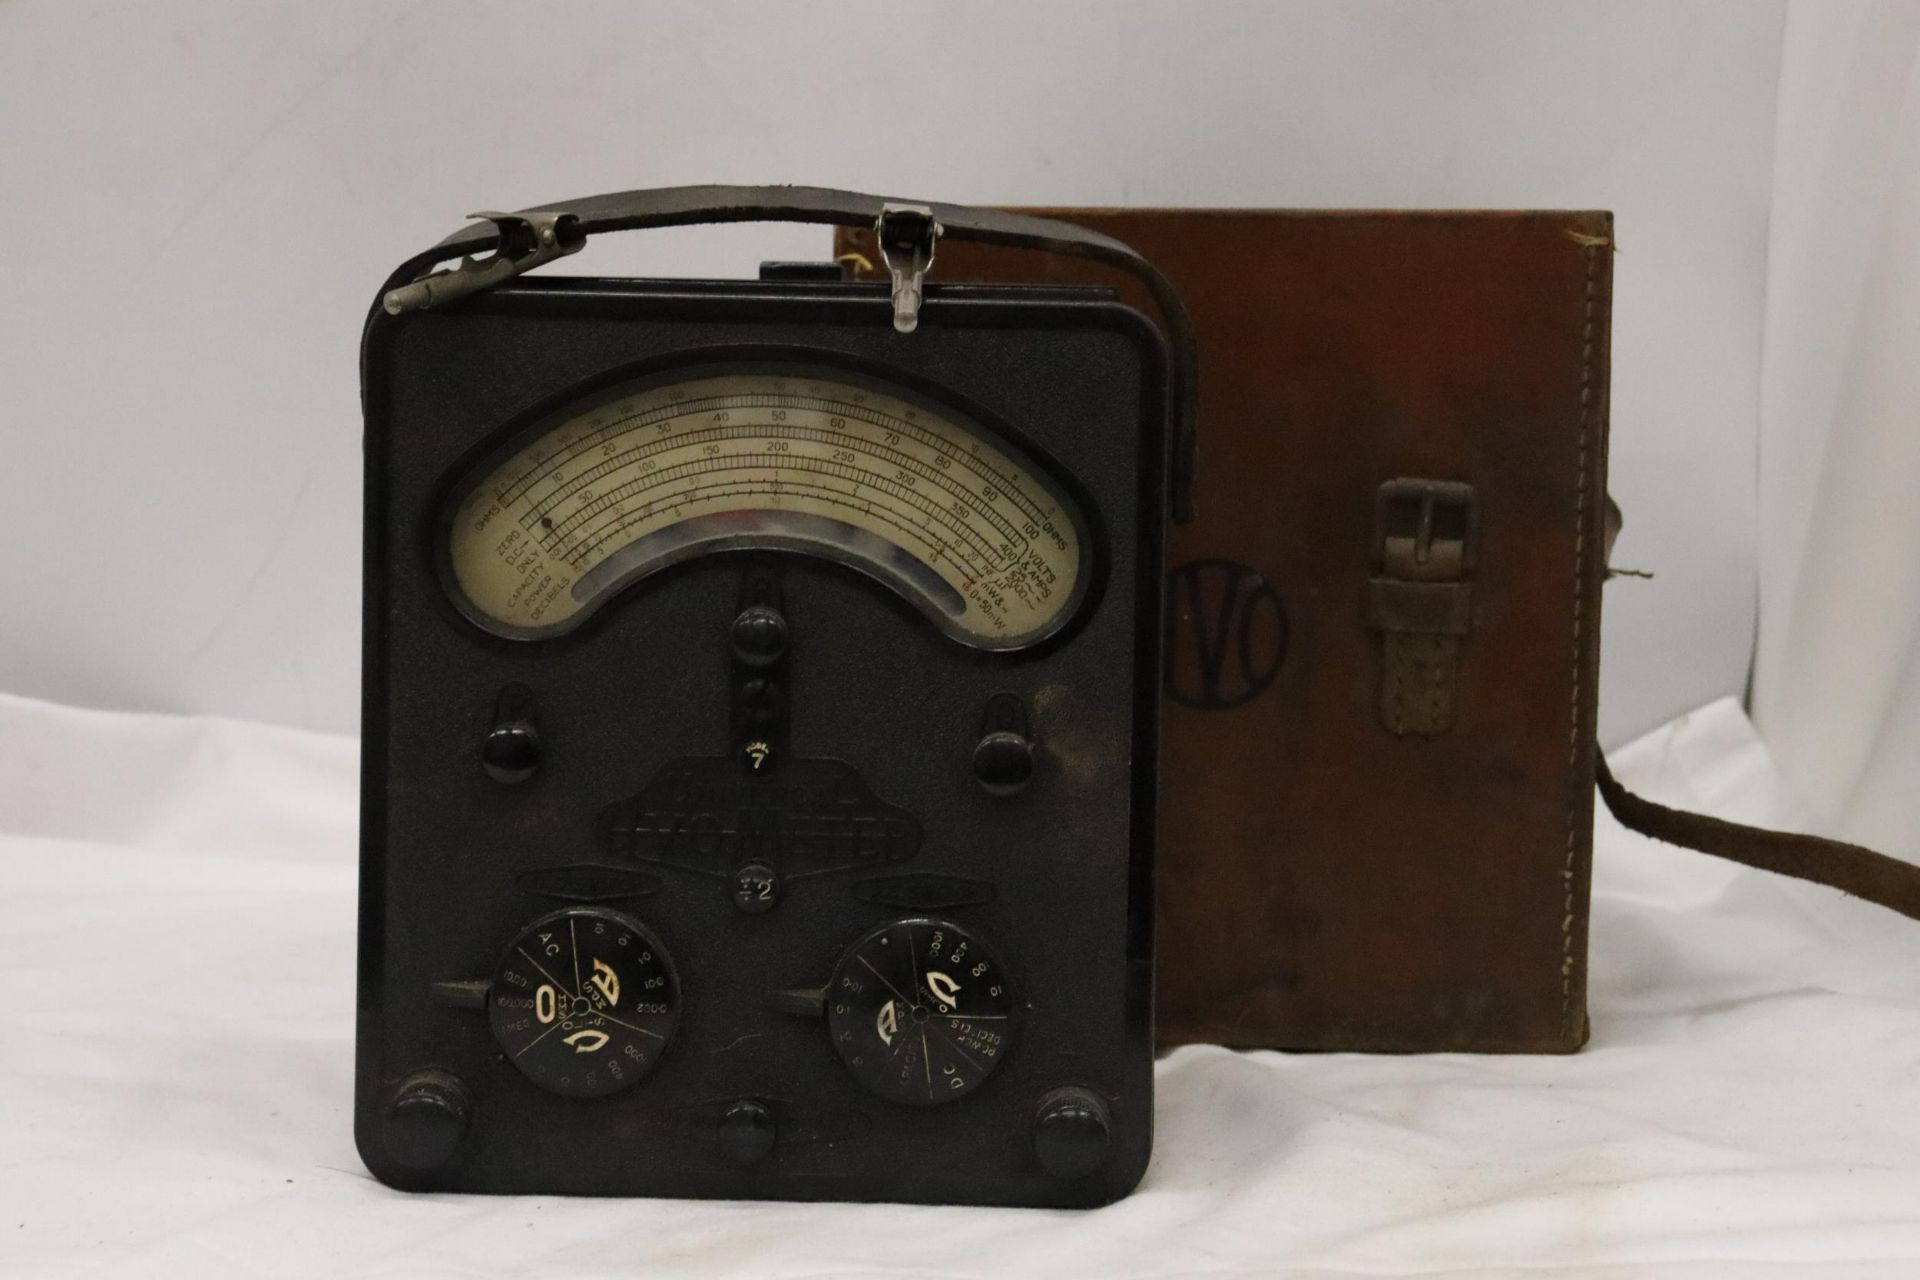 A LARGE BAKELITE AVOMETER IN LEATHER CASE